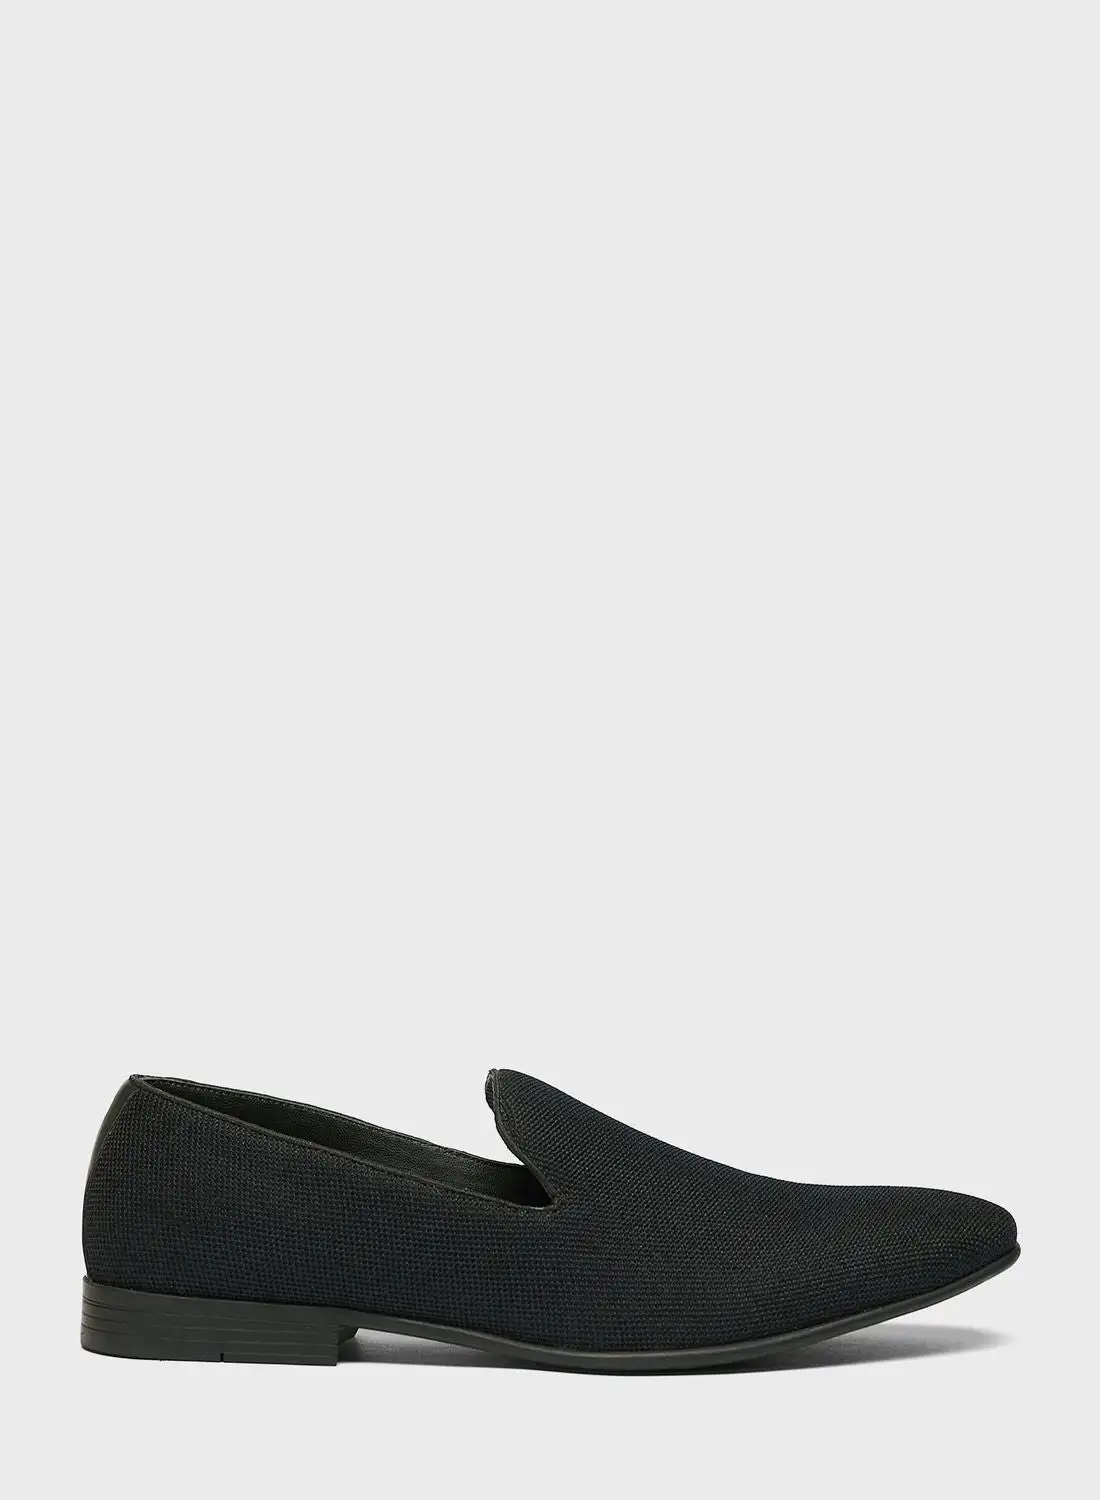 shoexpress Textured Formal Slip On Loafers